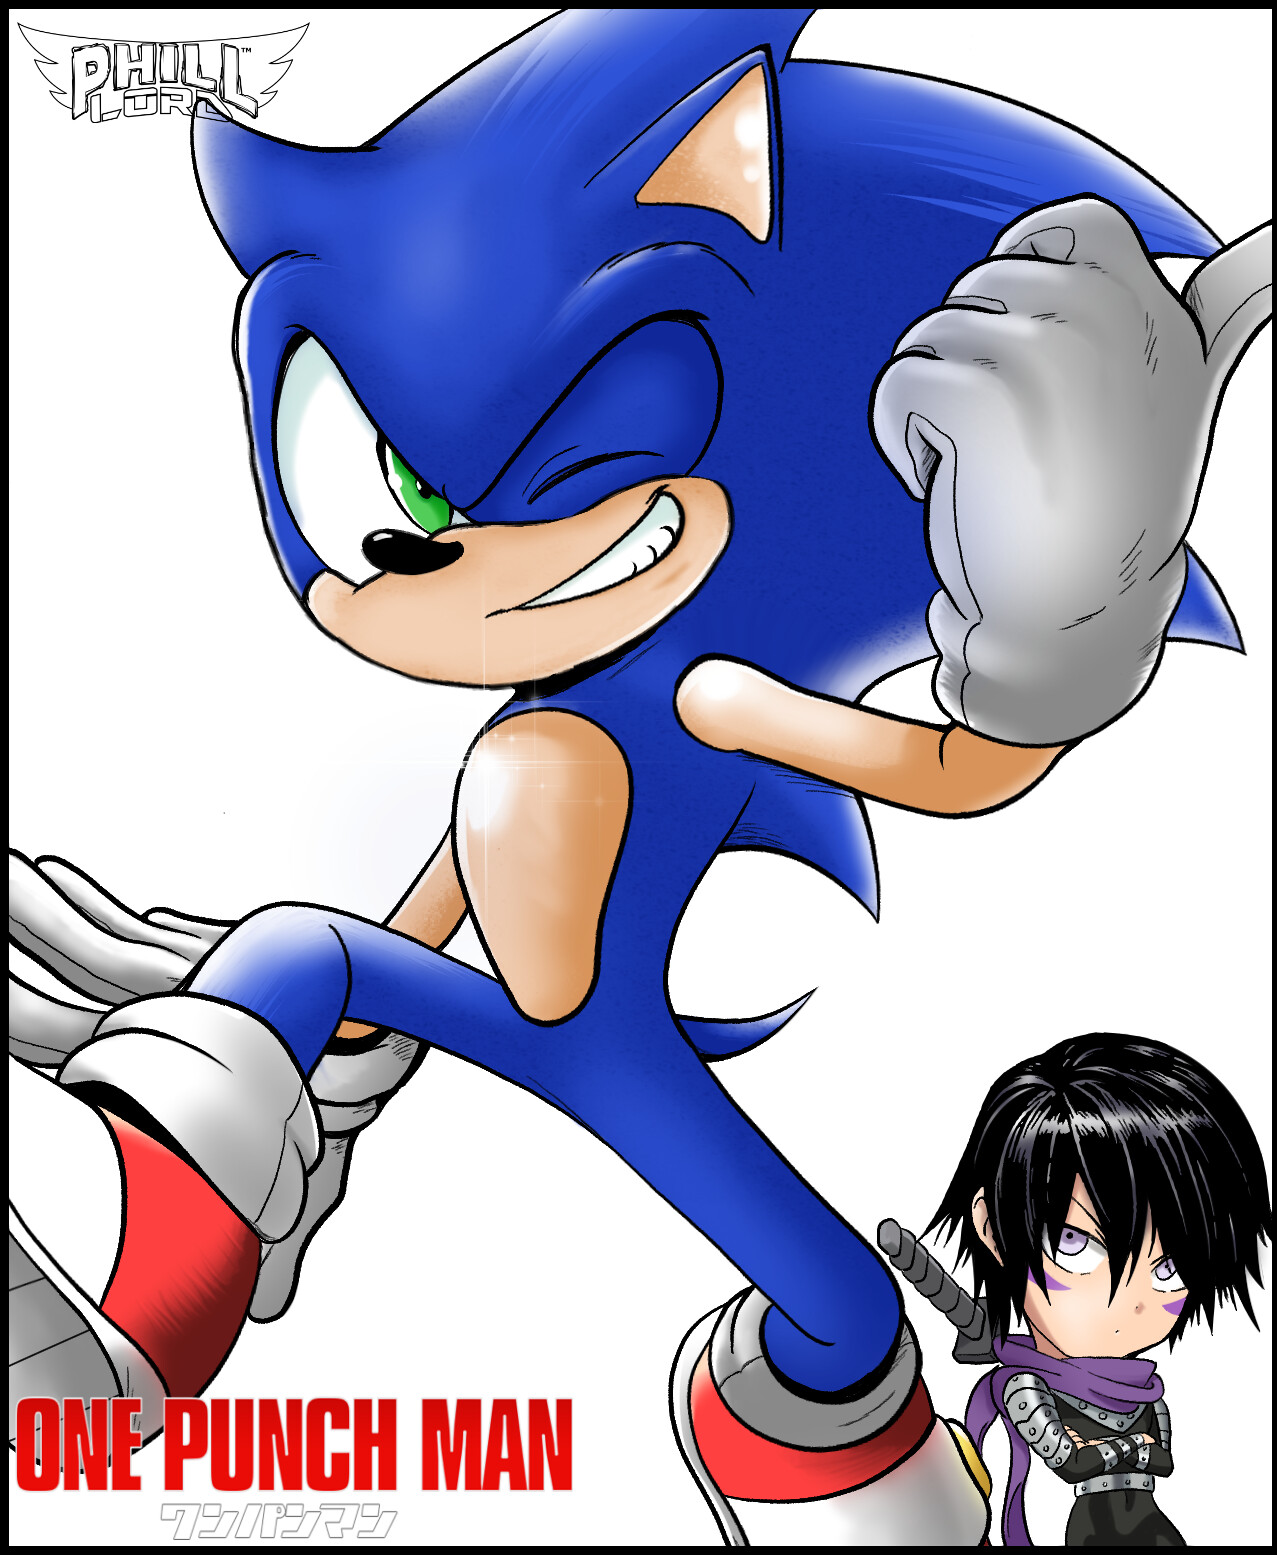 Download Sonic, the Speed of Sound Ninja in One Punch Man Wallpaper |  Wallpapers.com